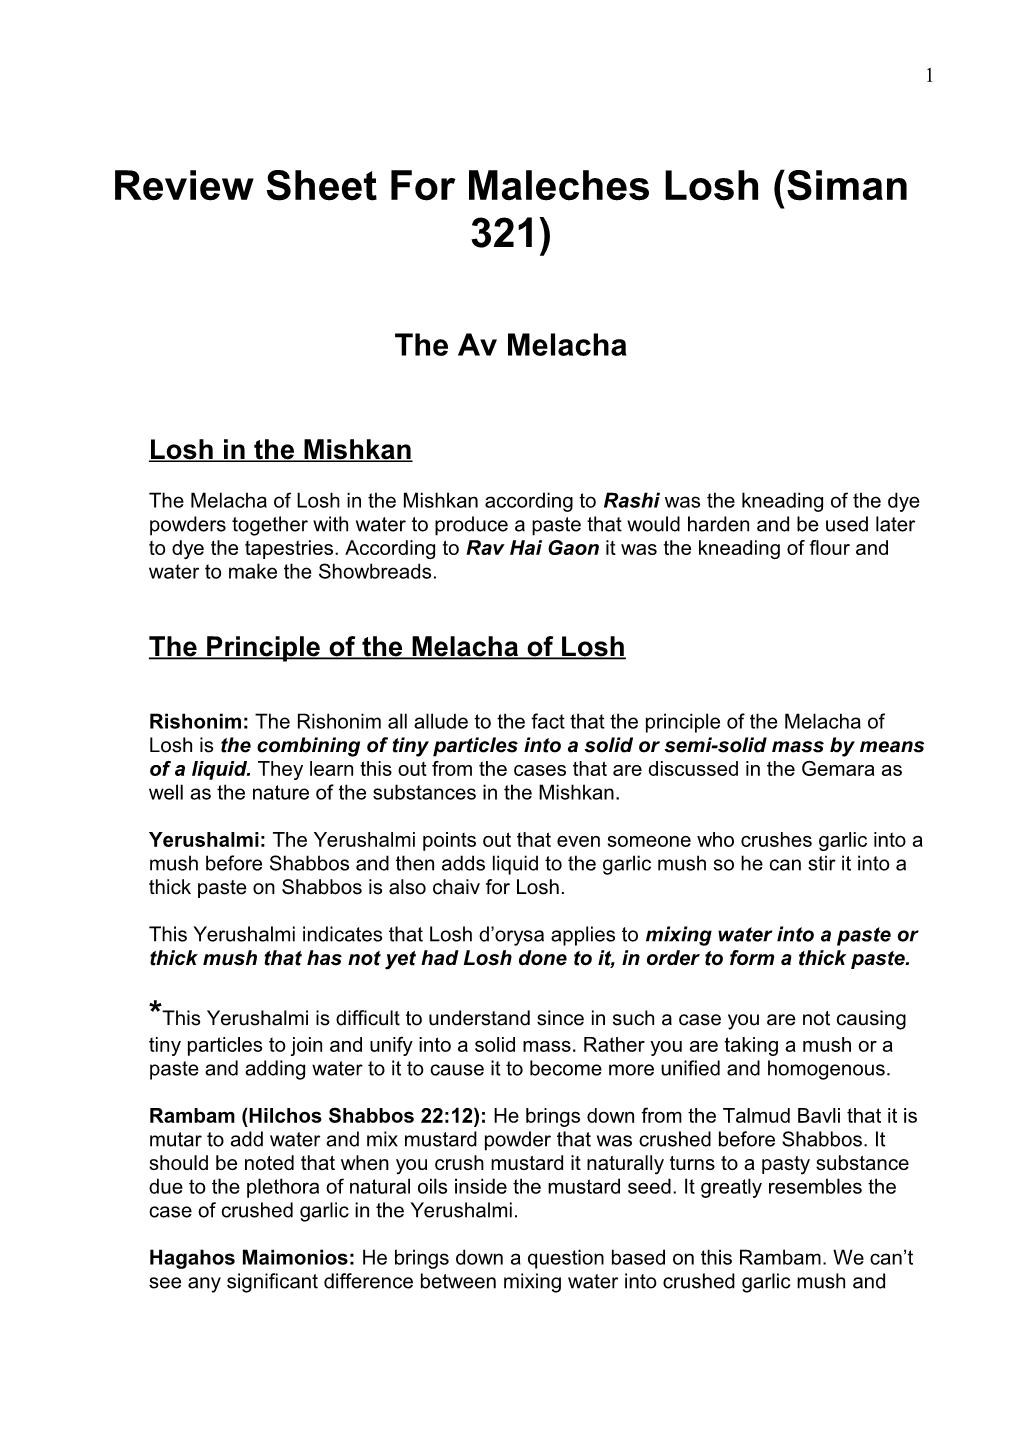 Review Sheet for Maleches Losh (Siman 321)